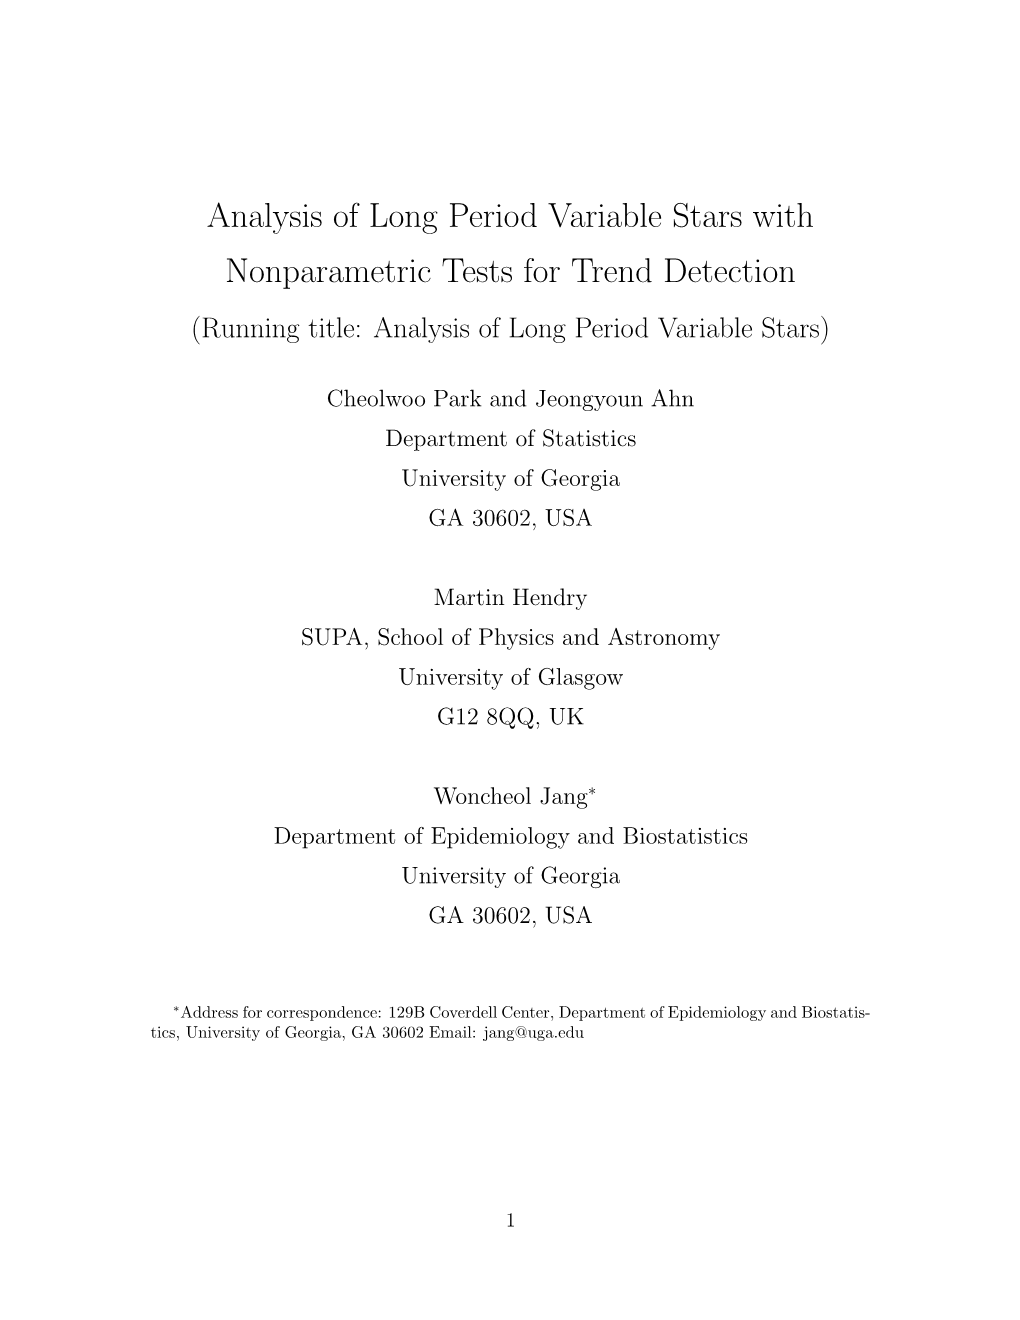 Analysis of Long Period Variable Stars with Nonparametric Tests for Trend Detection (Running Title: Analysis of Long Period Variable Stars)